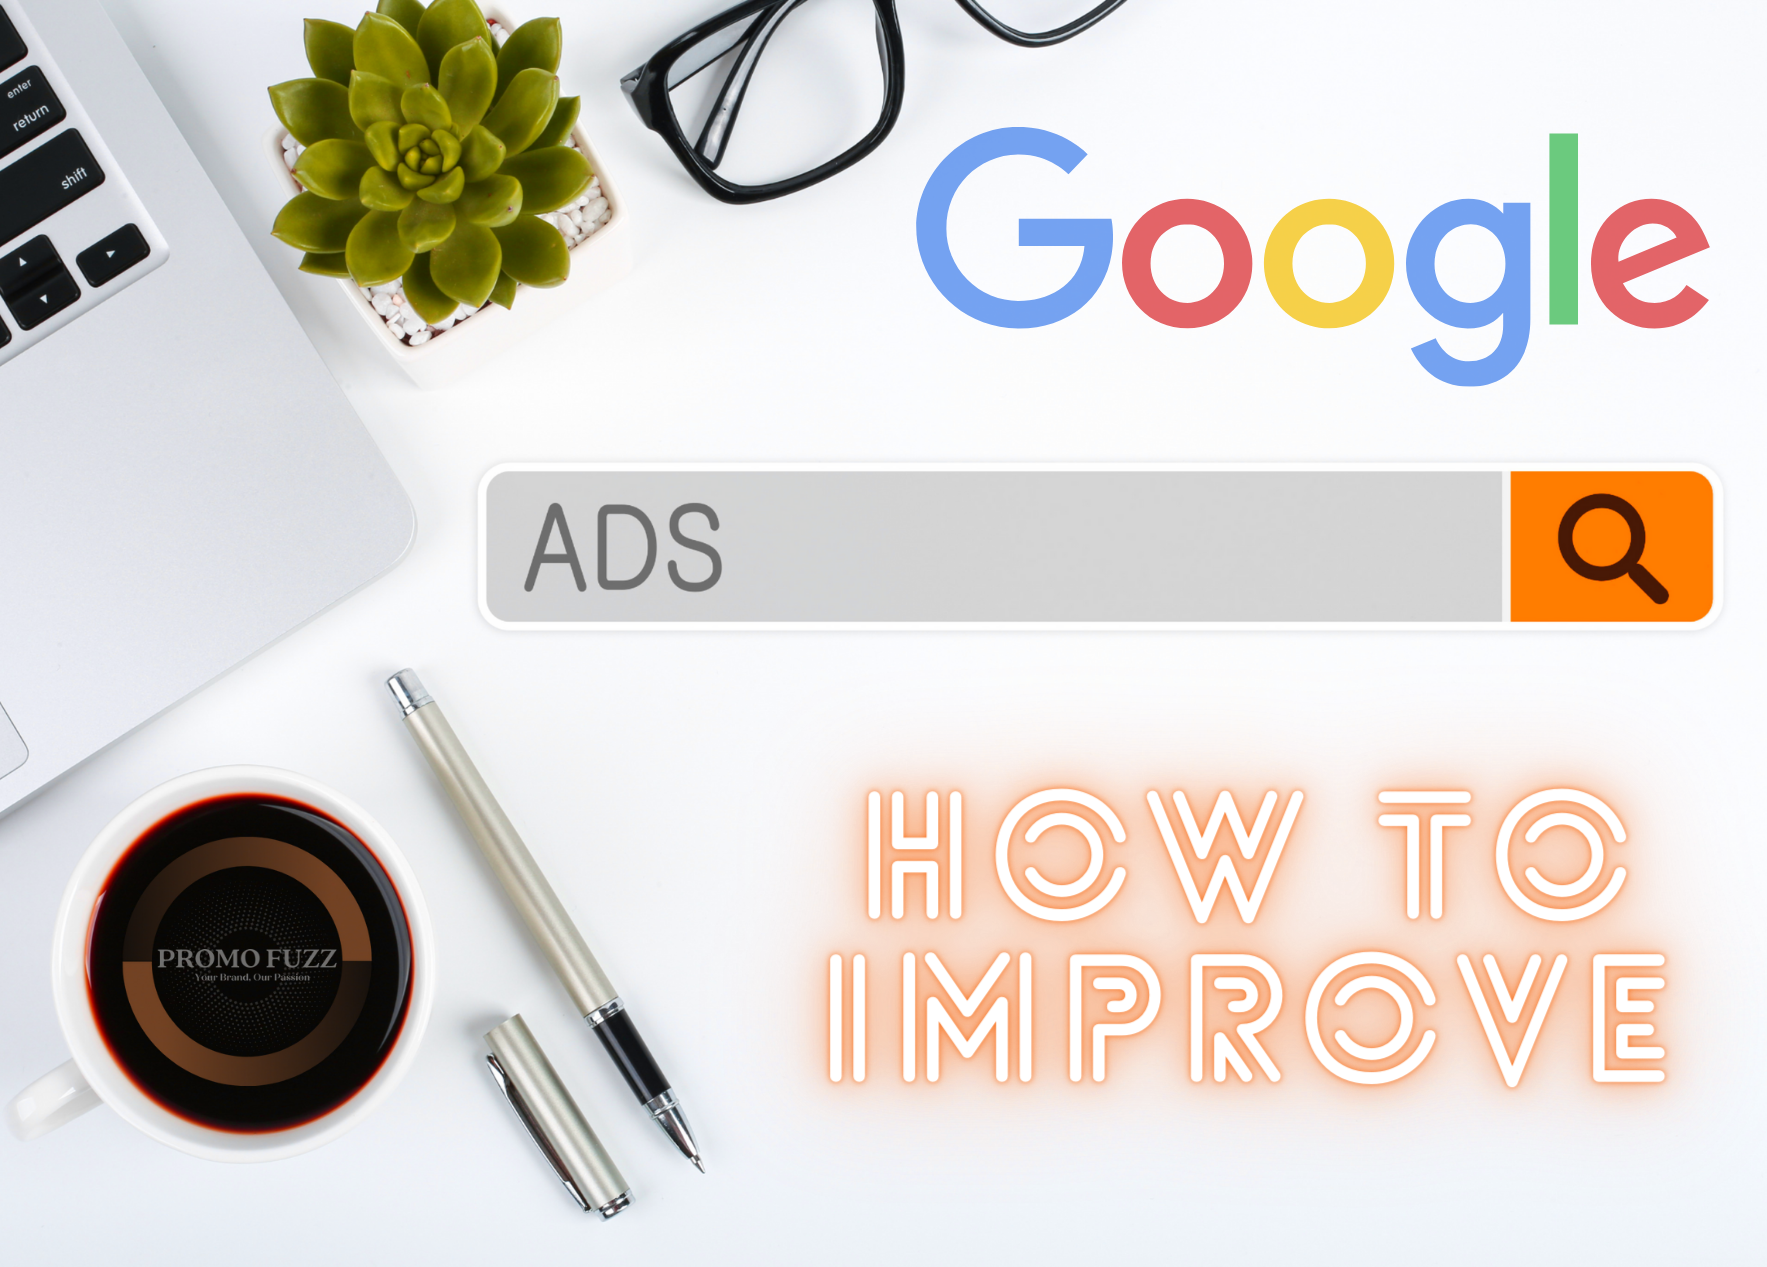 Learn with Promo Fuzz, How to Improve your Google Ads